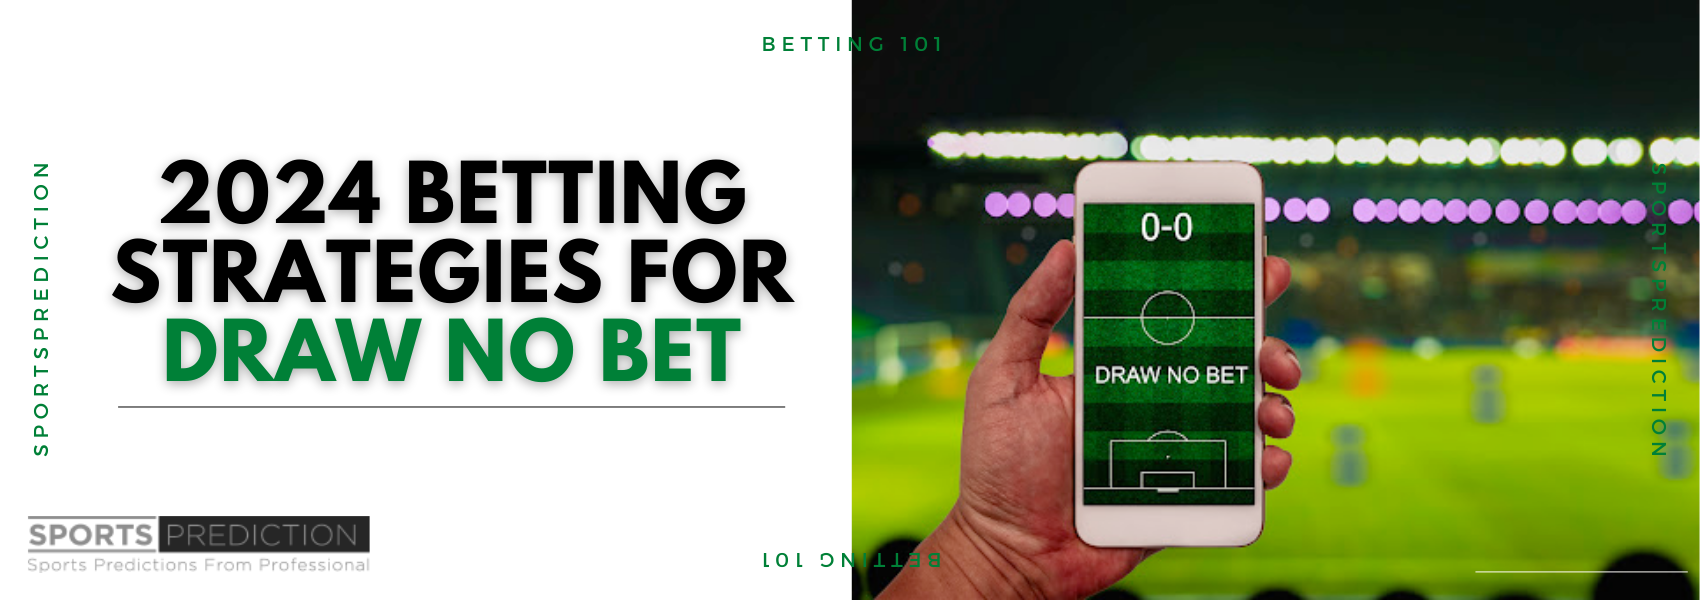 2024 Betting Strategies For Draw No Bet